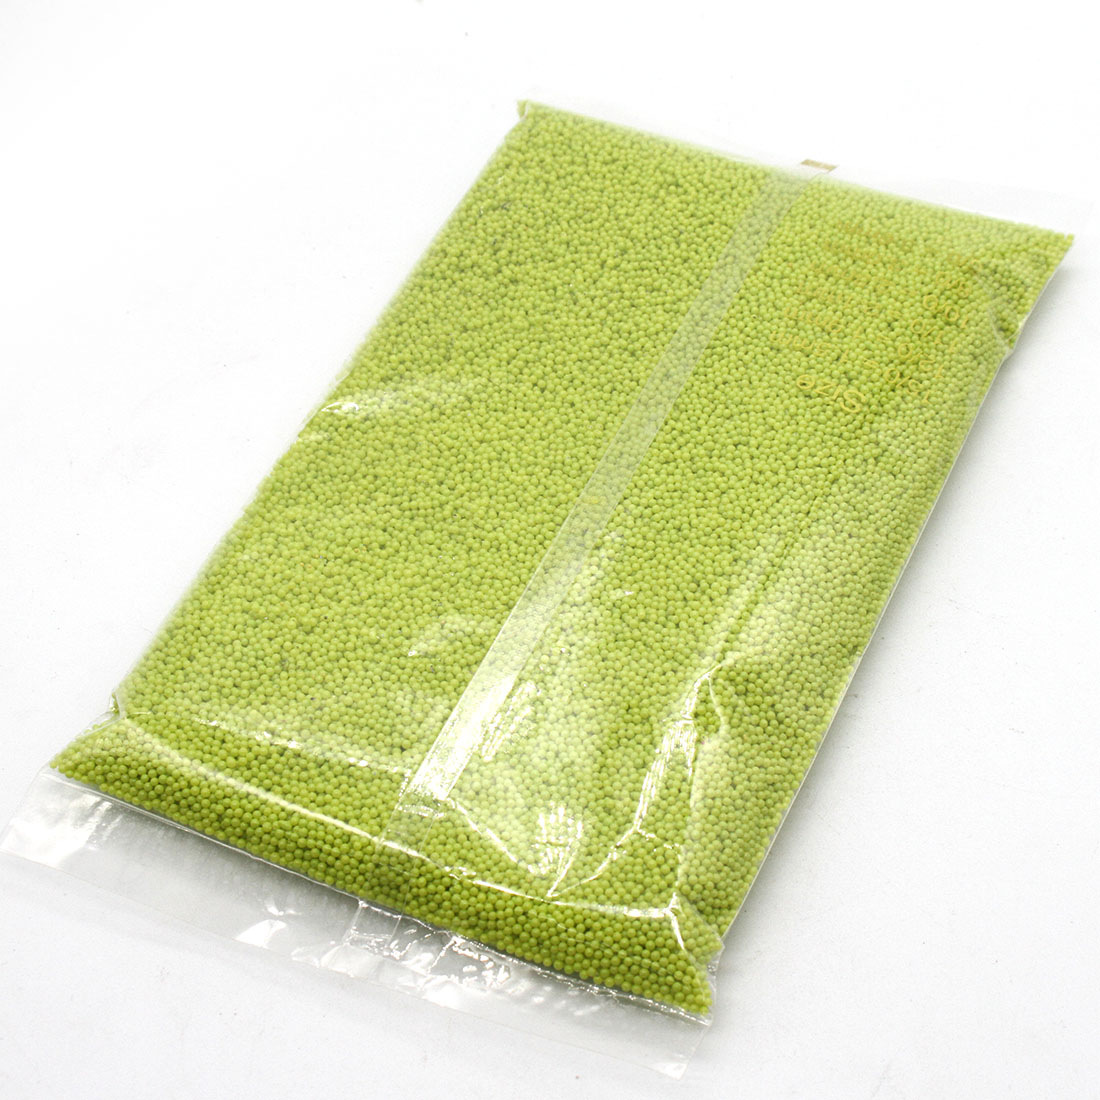 Apple green, 0.6 to1-1.5 mm